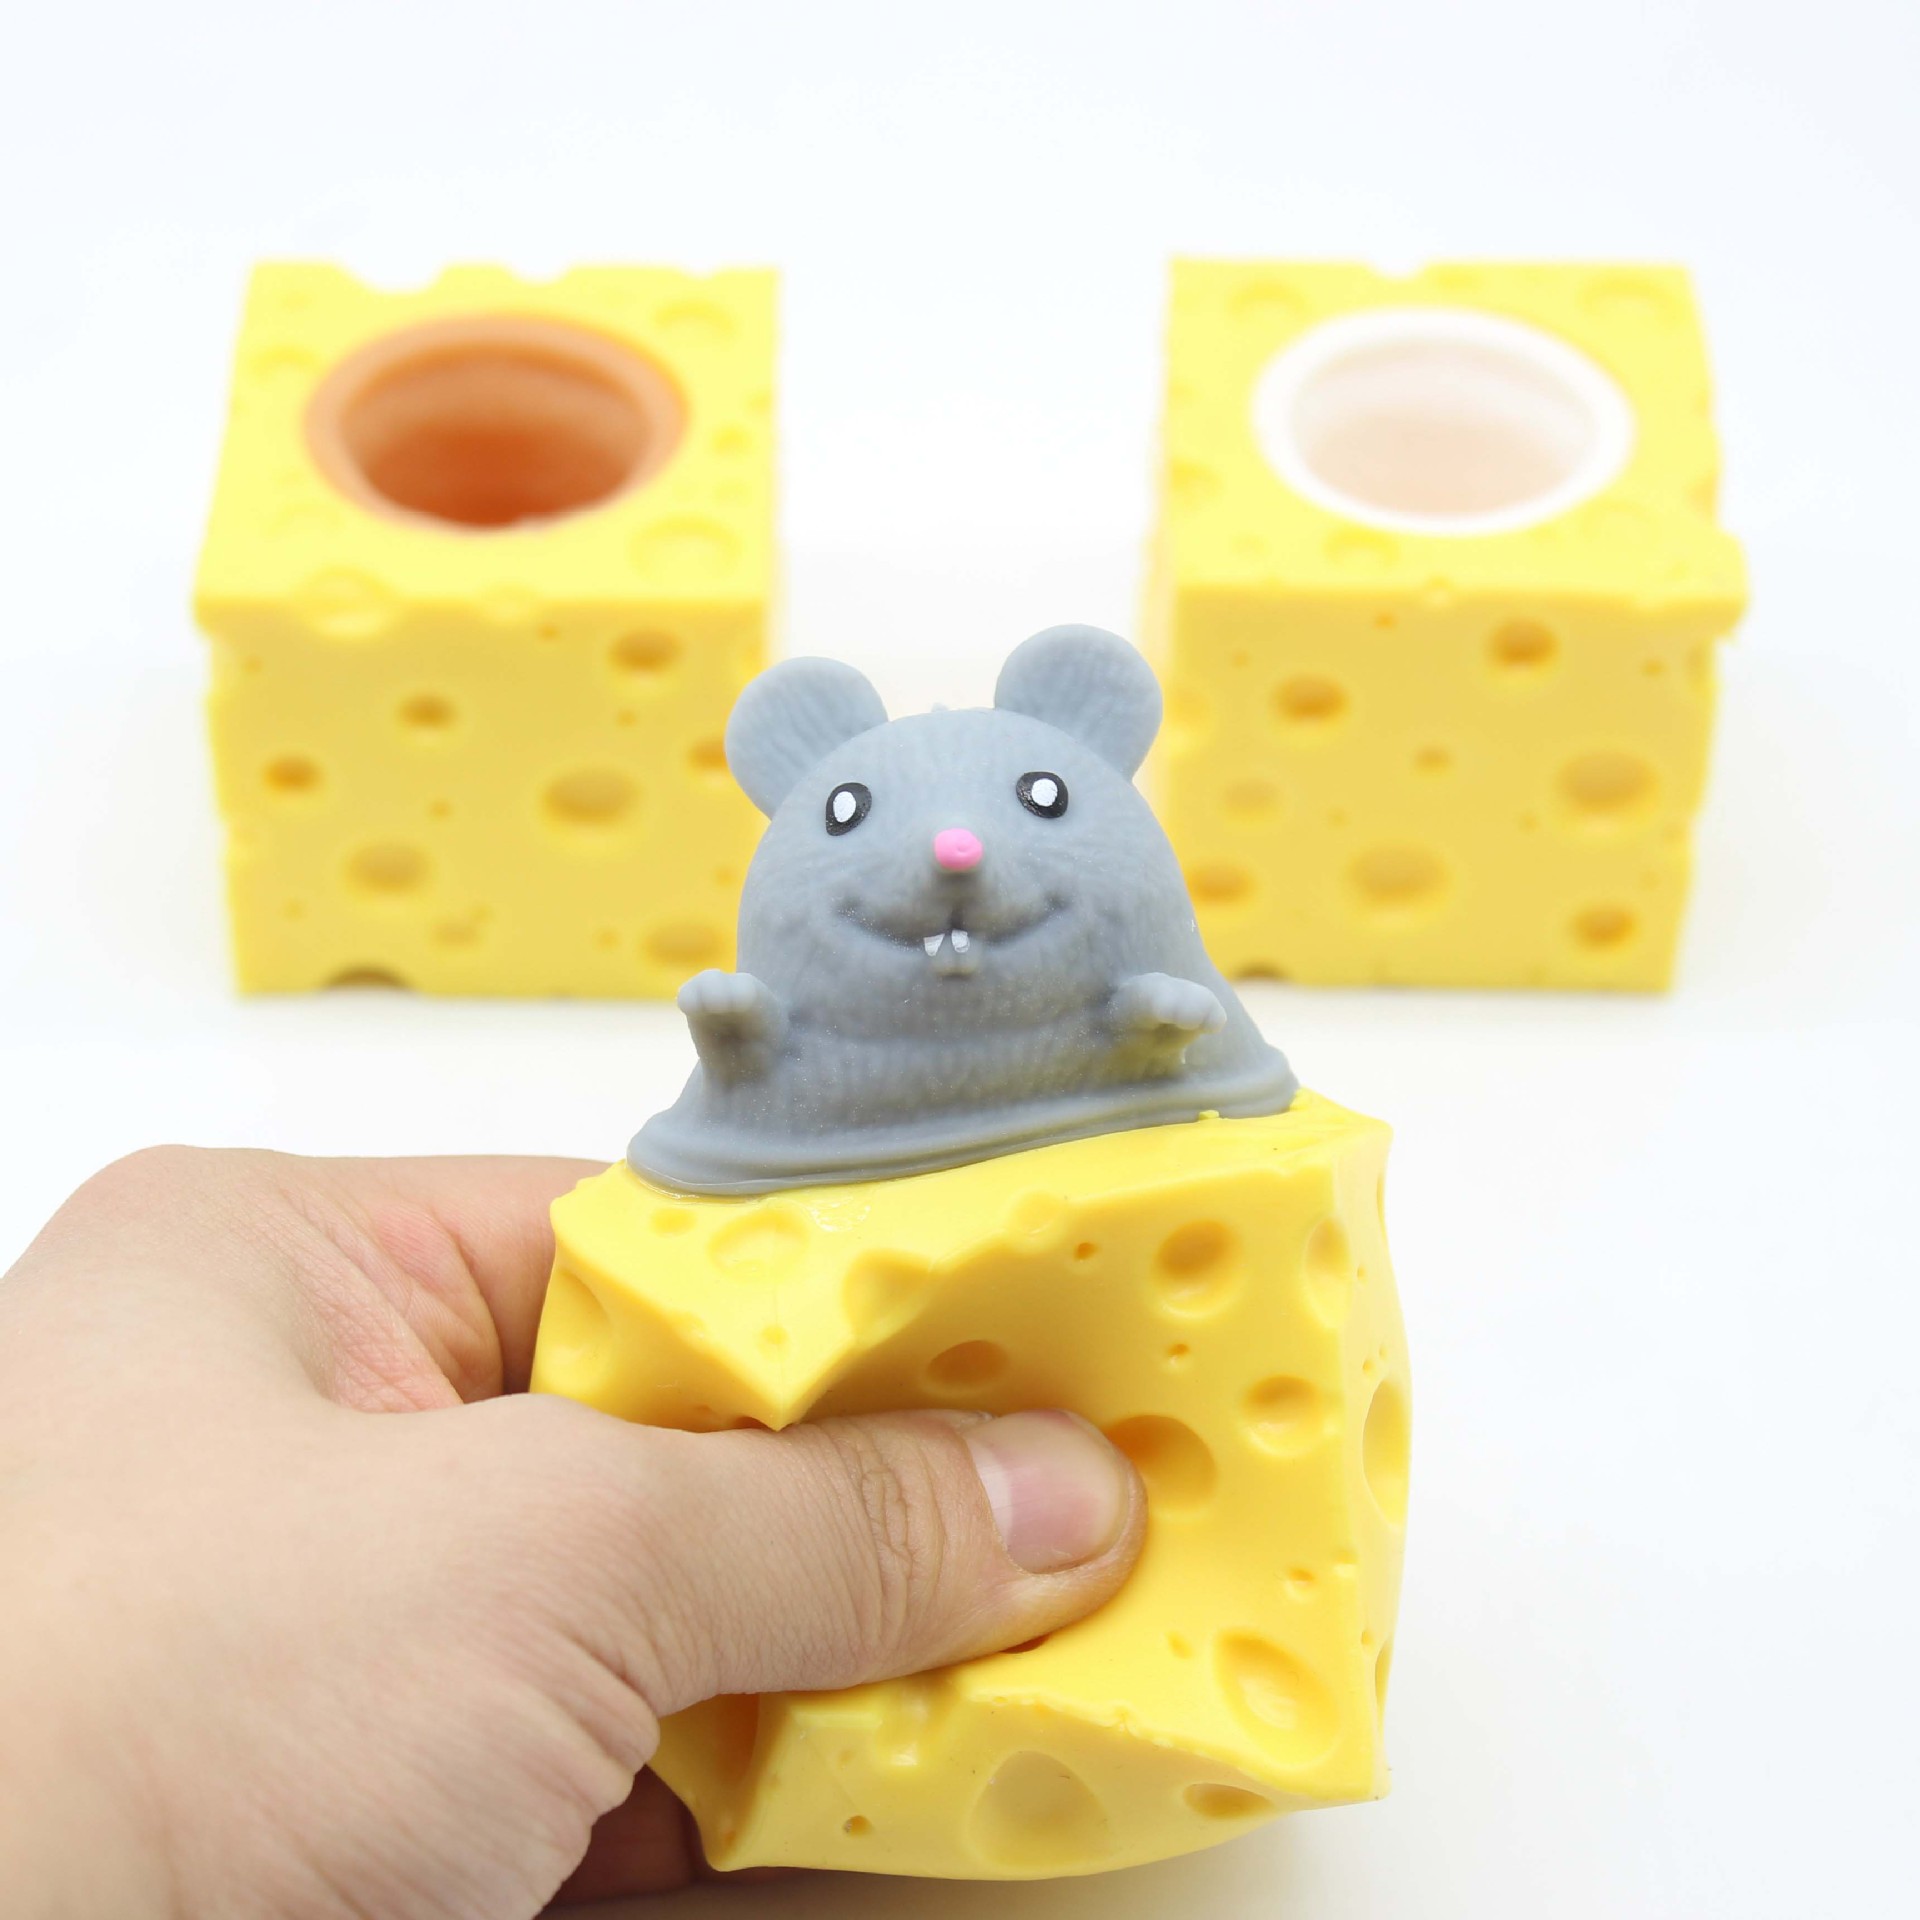 XMAS SALE-Mice in Cheese Toy-🔥BUY 5 GET 5 FREE & FREE SHIPPING